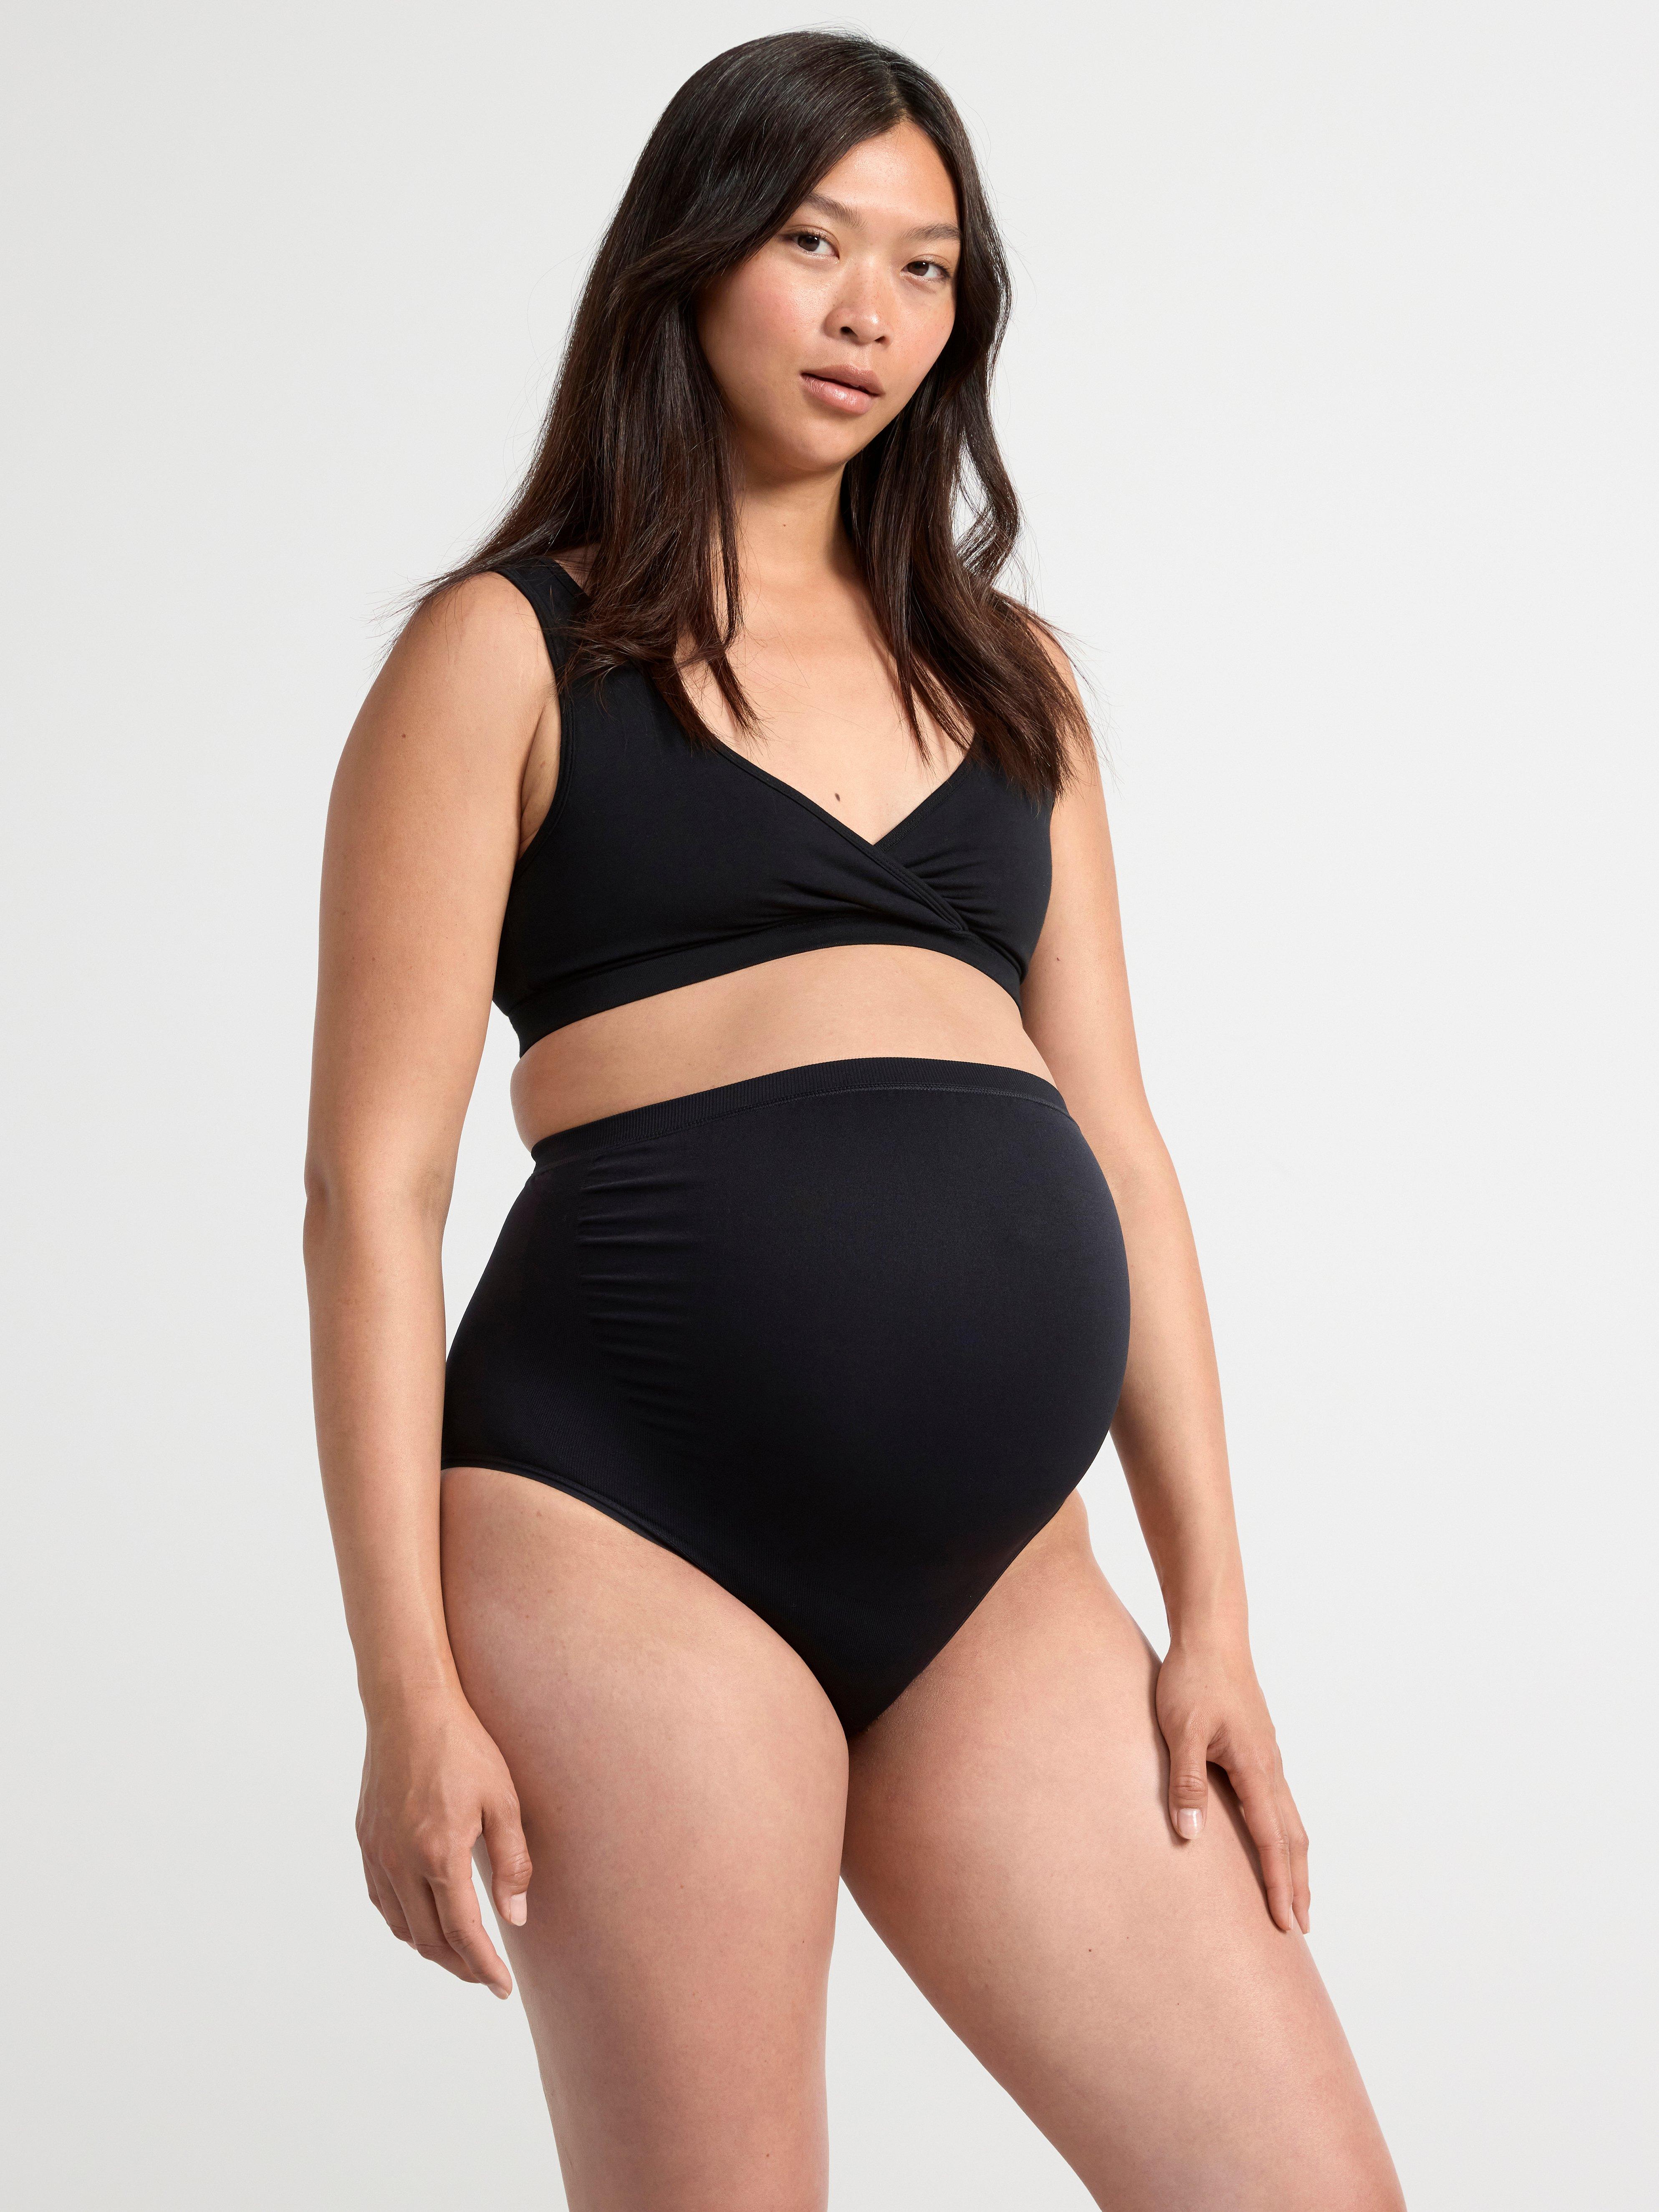 Maternity knickers for moms to be!